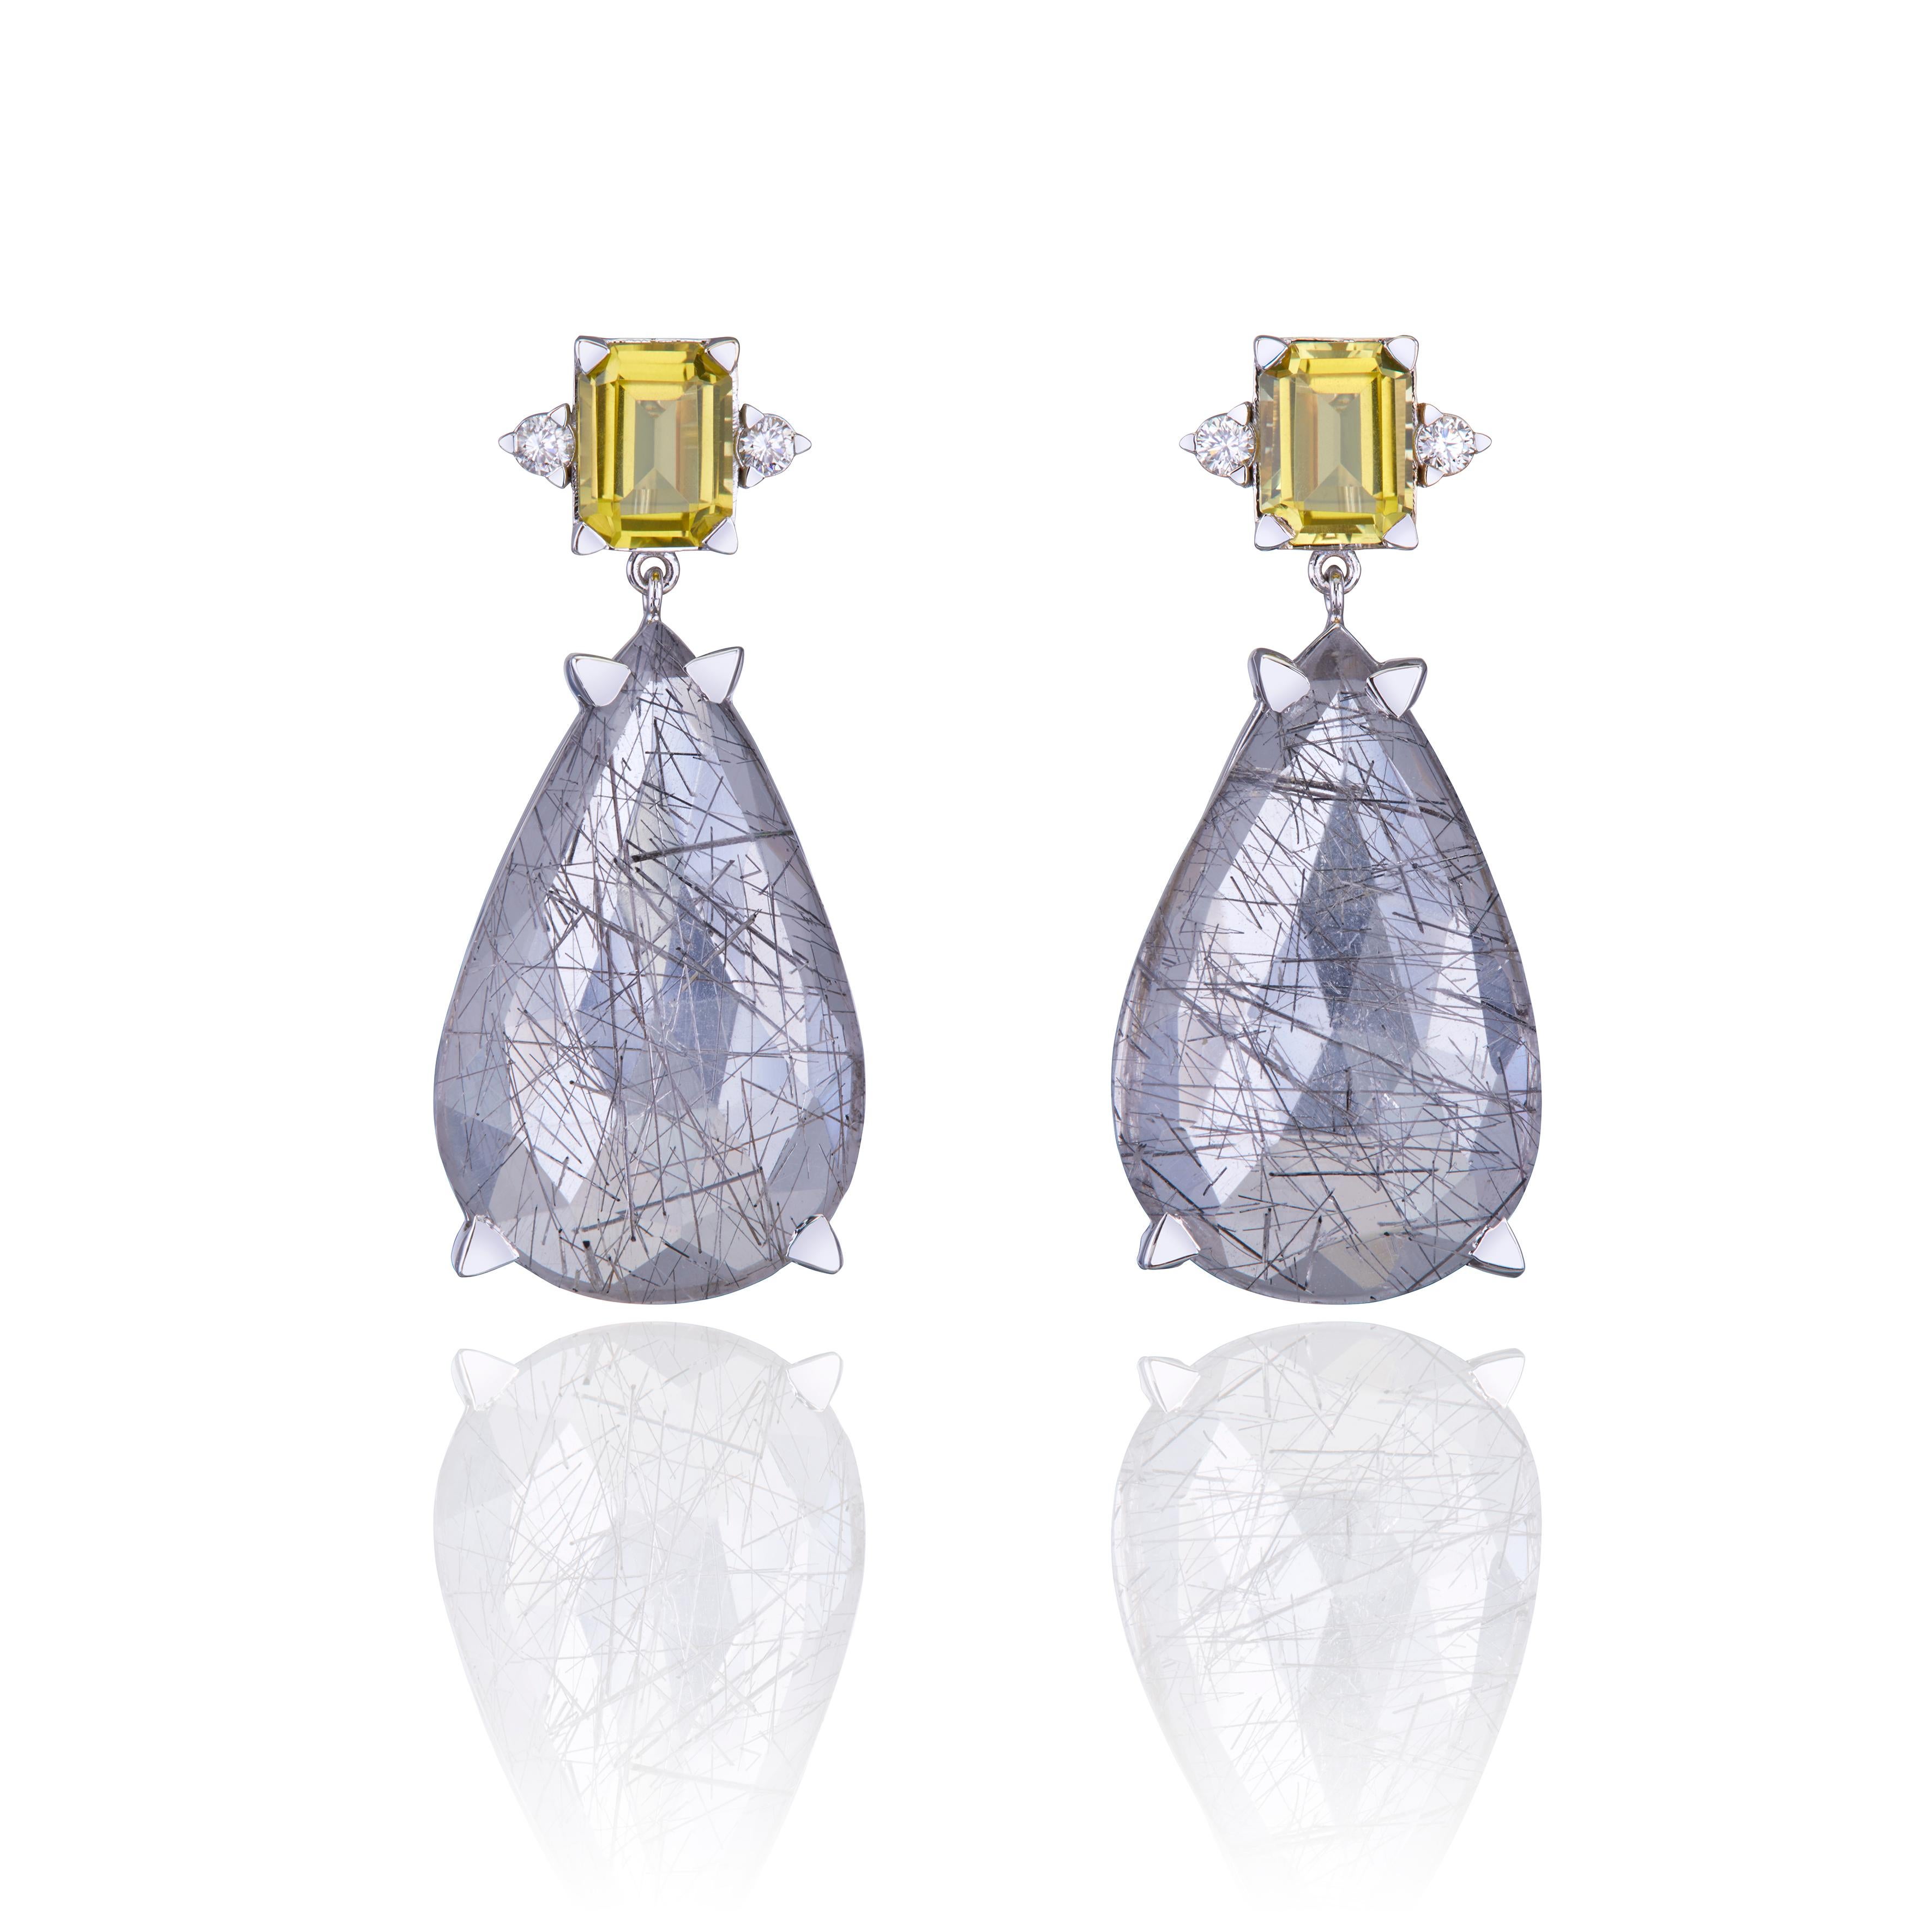 Drop Earrings in 18kt White Gold, with Pear Rutilated Quartz, Yellow Quartz and Diamonds.
This ONE OF A KIND masterpiece comes from the brand Nicofilimon, a brand based in Greece. It's lead designer, Nicofilimon, sees jewellery as an art form that